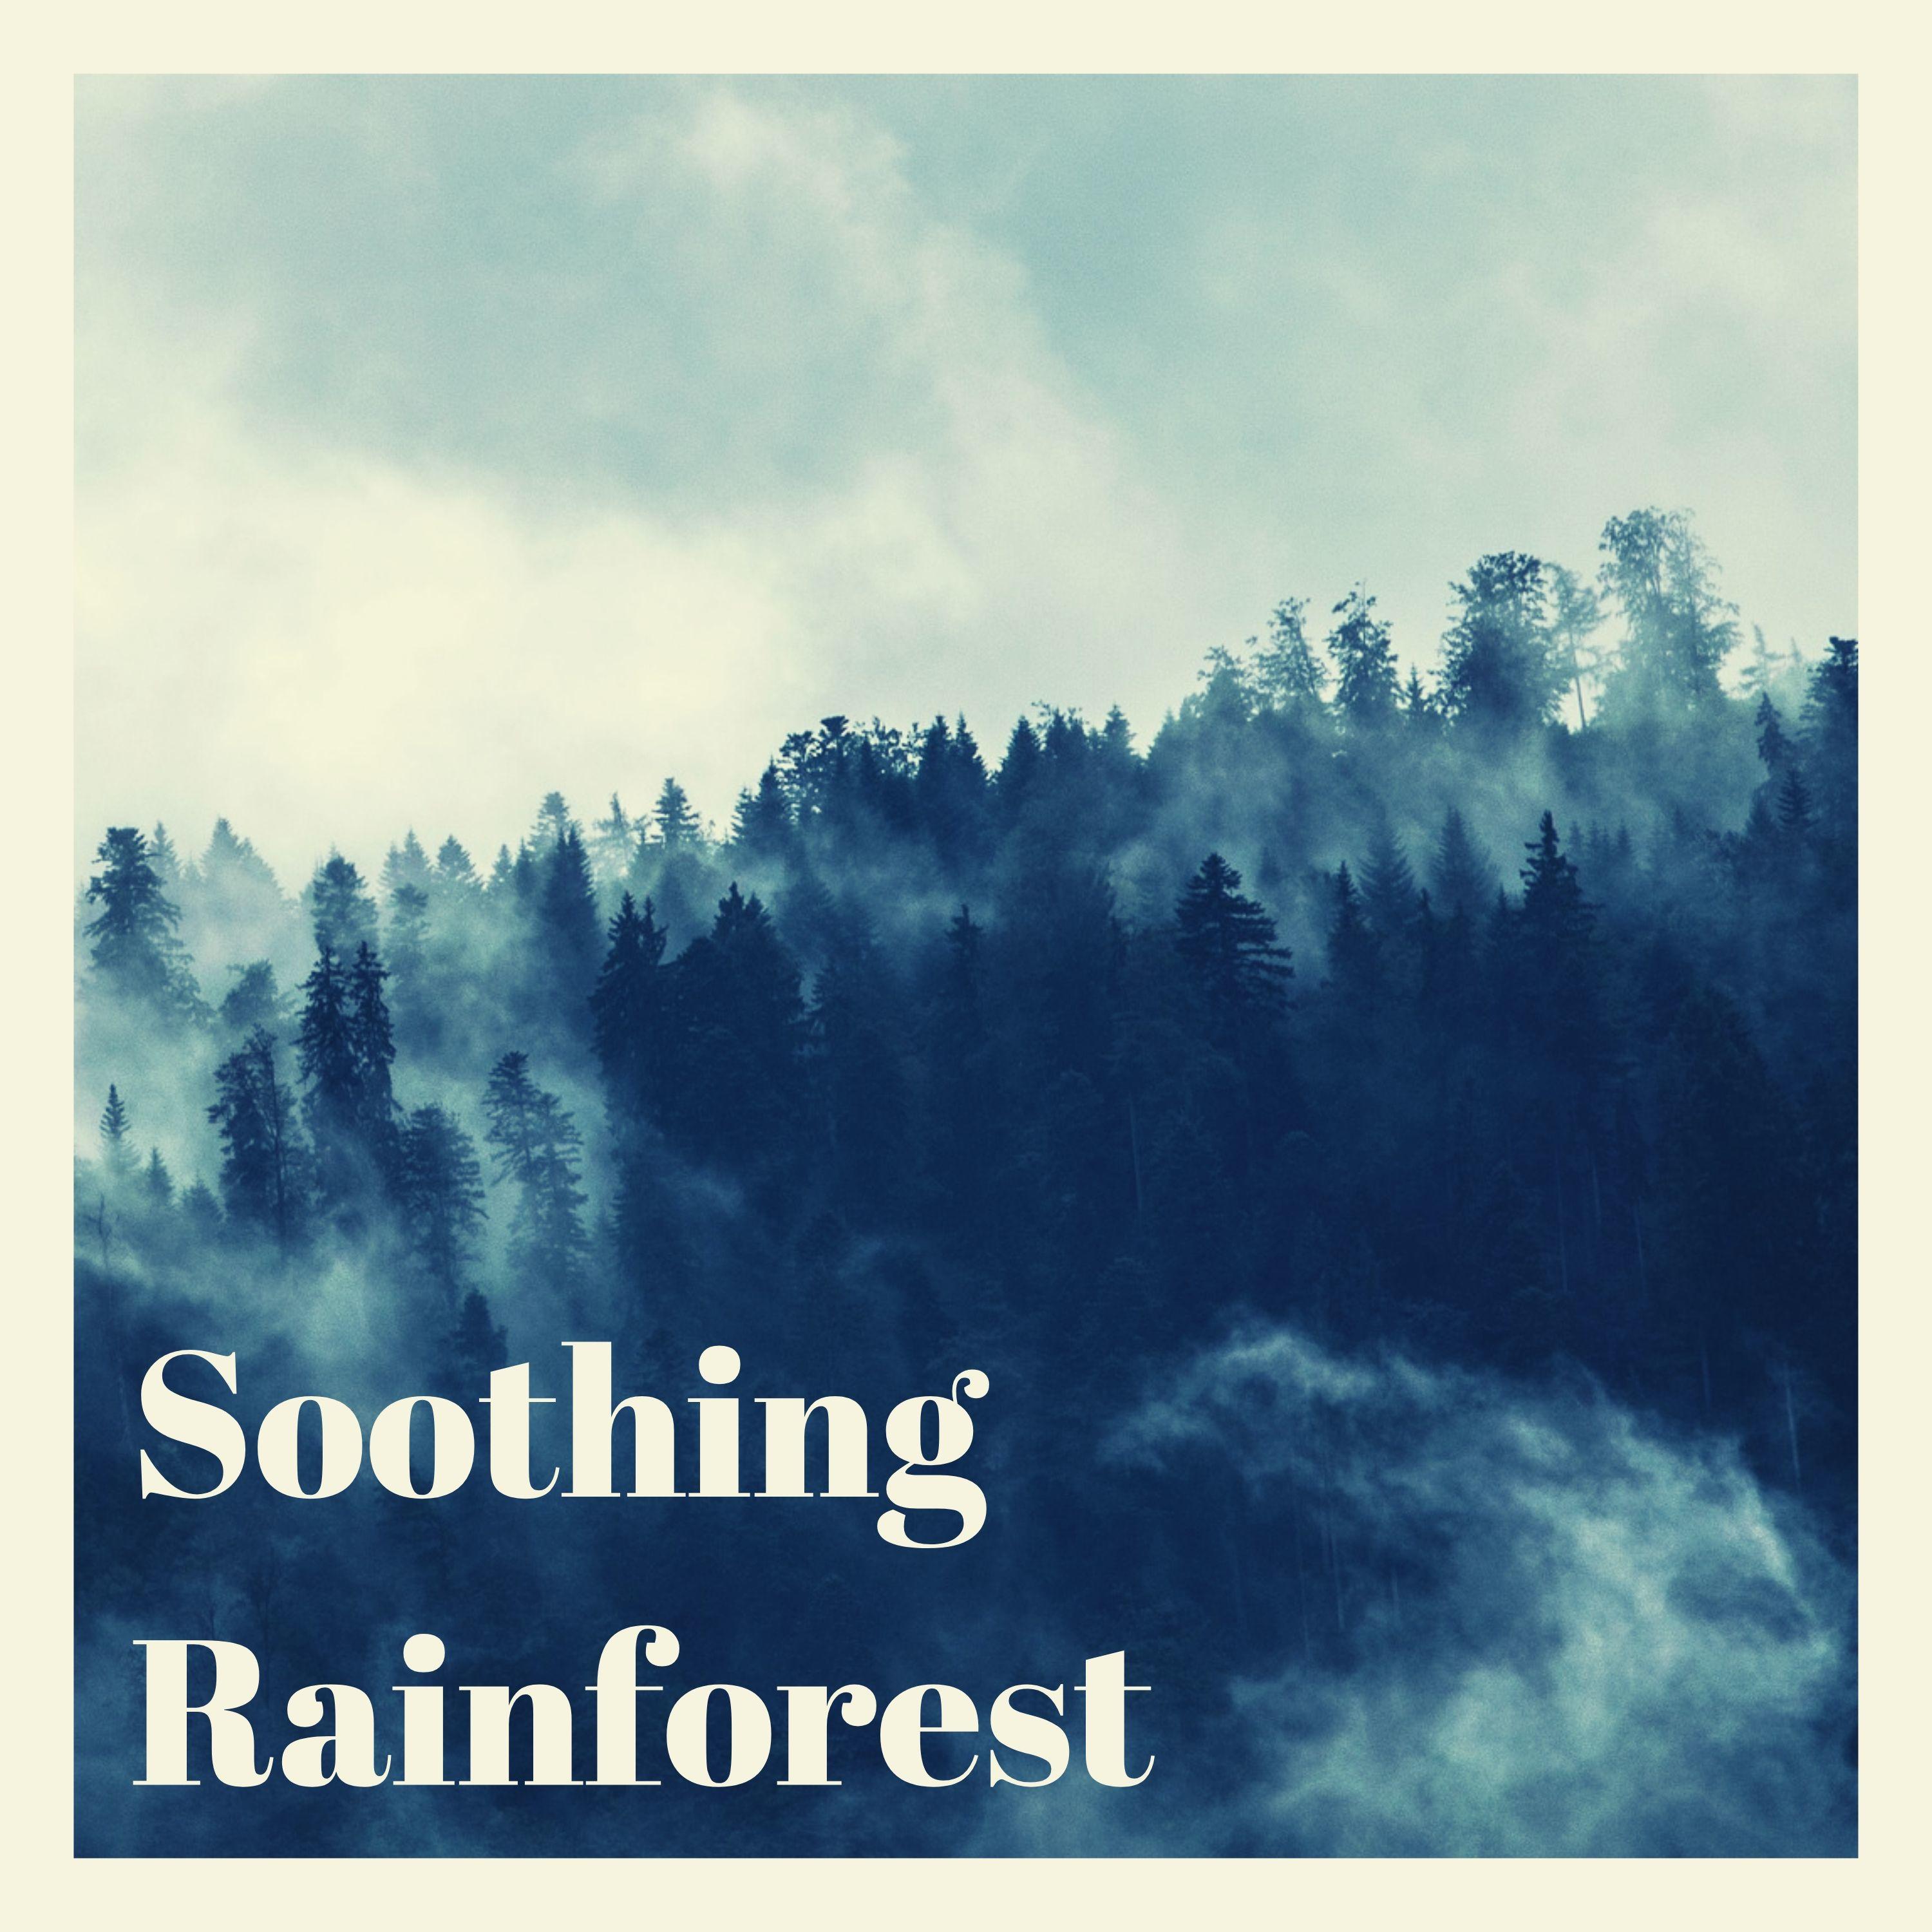 Soothing Rainforest